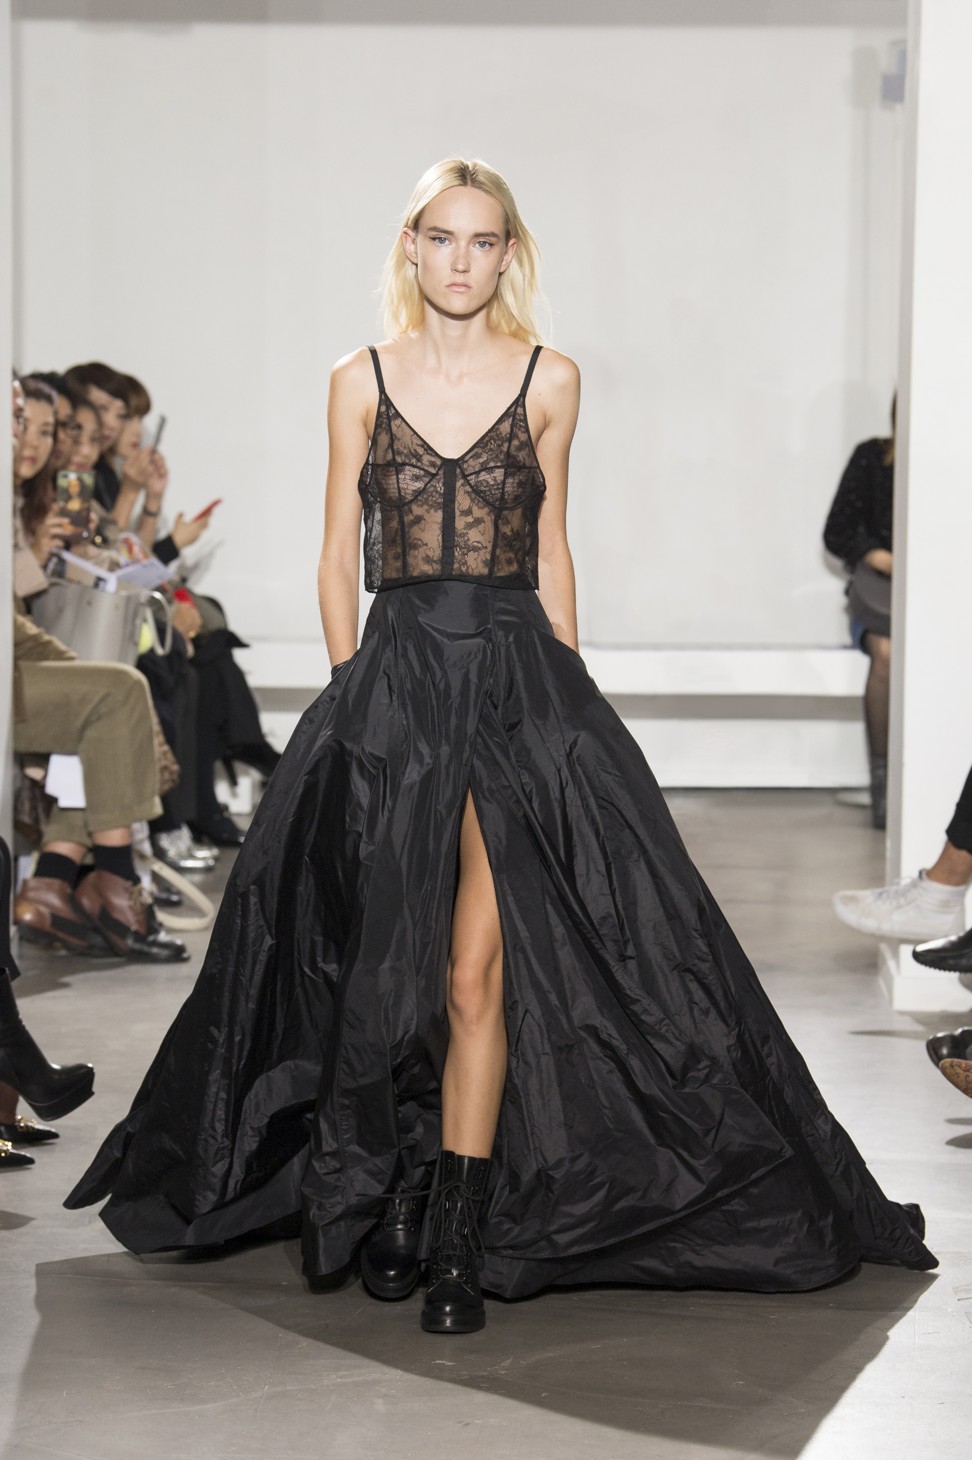 Olivier Theyskens likes to work with lace and chiffon.